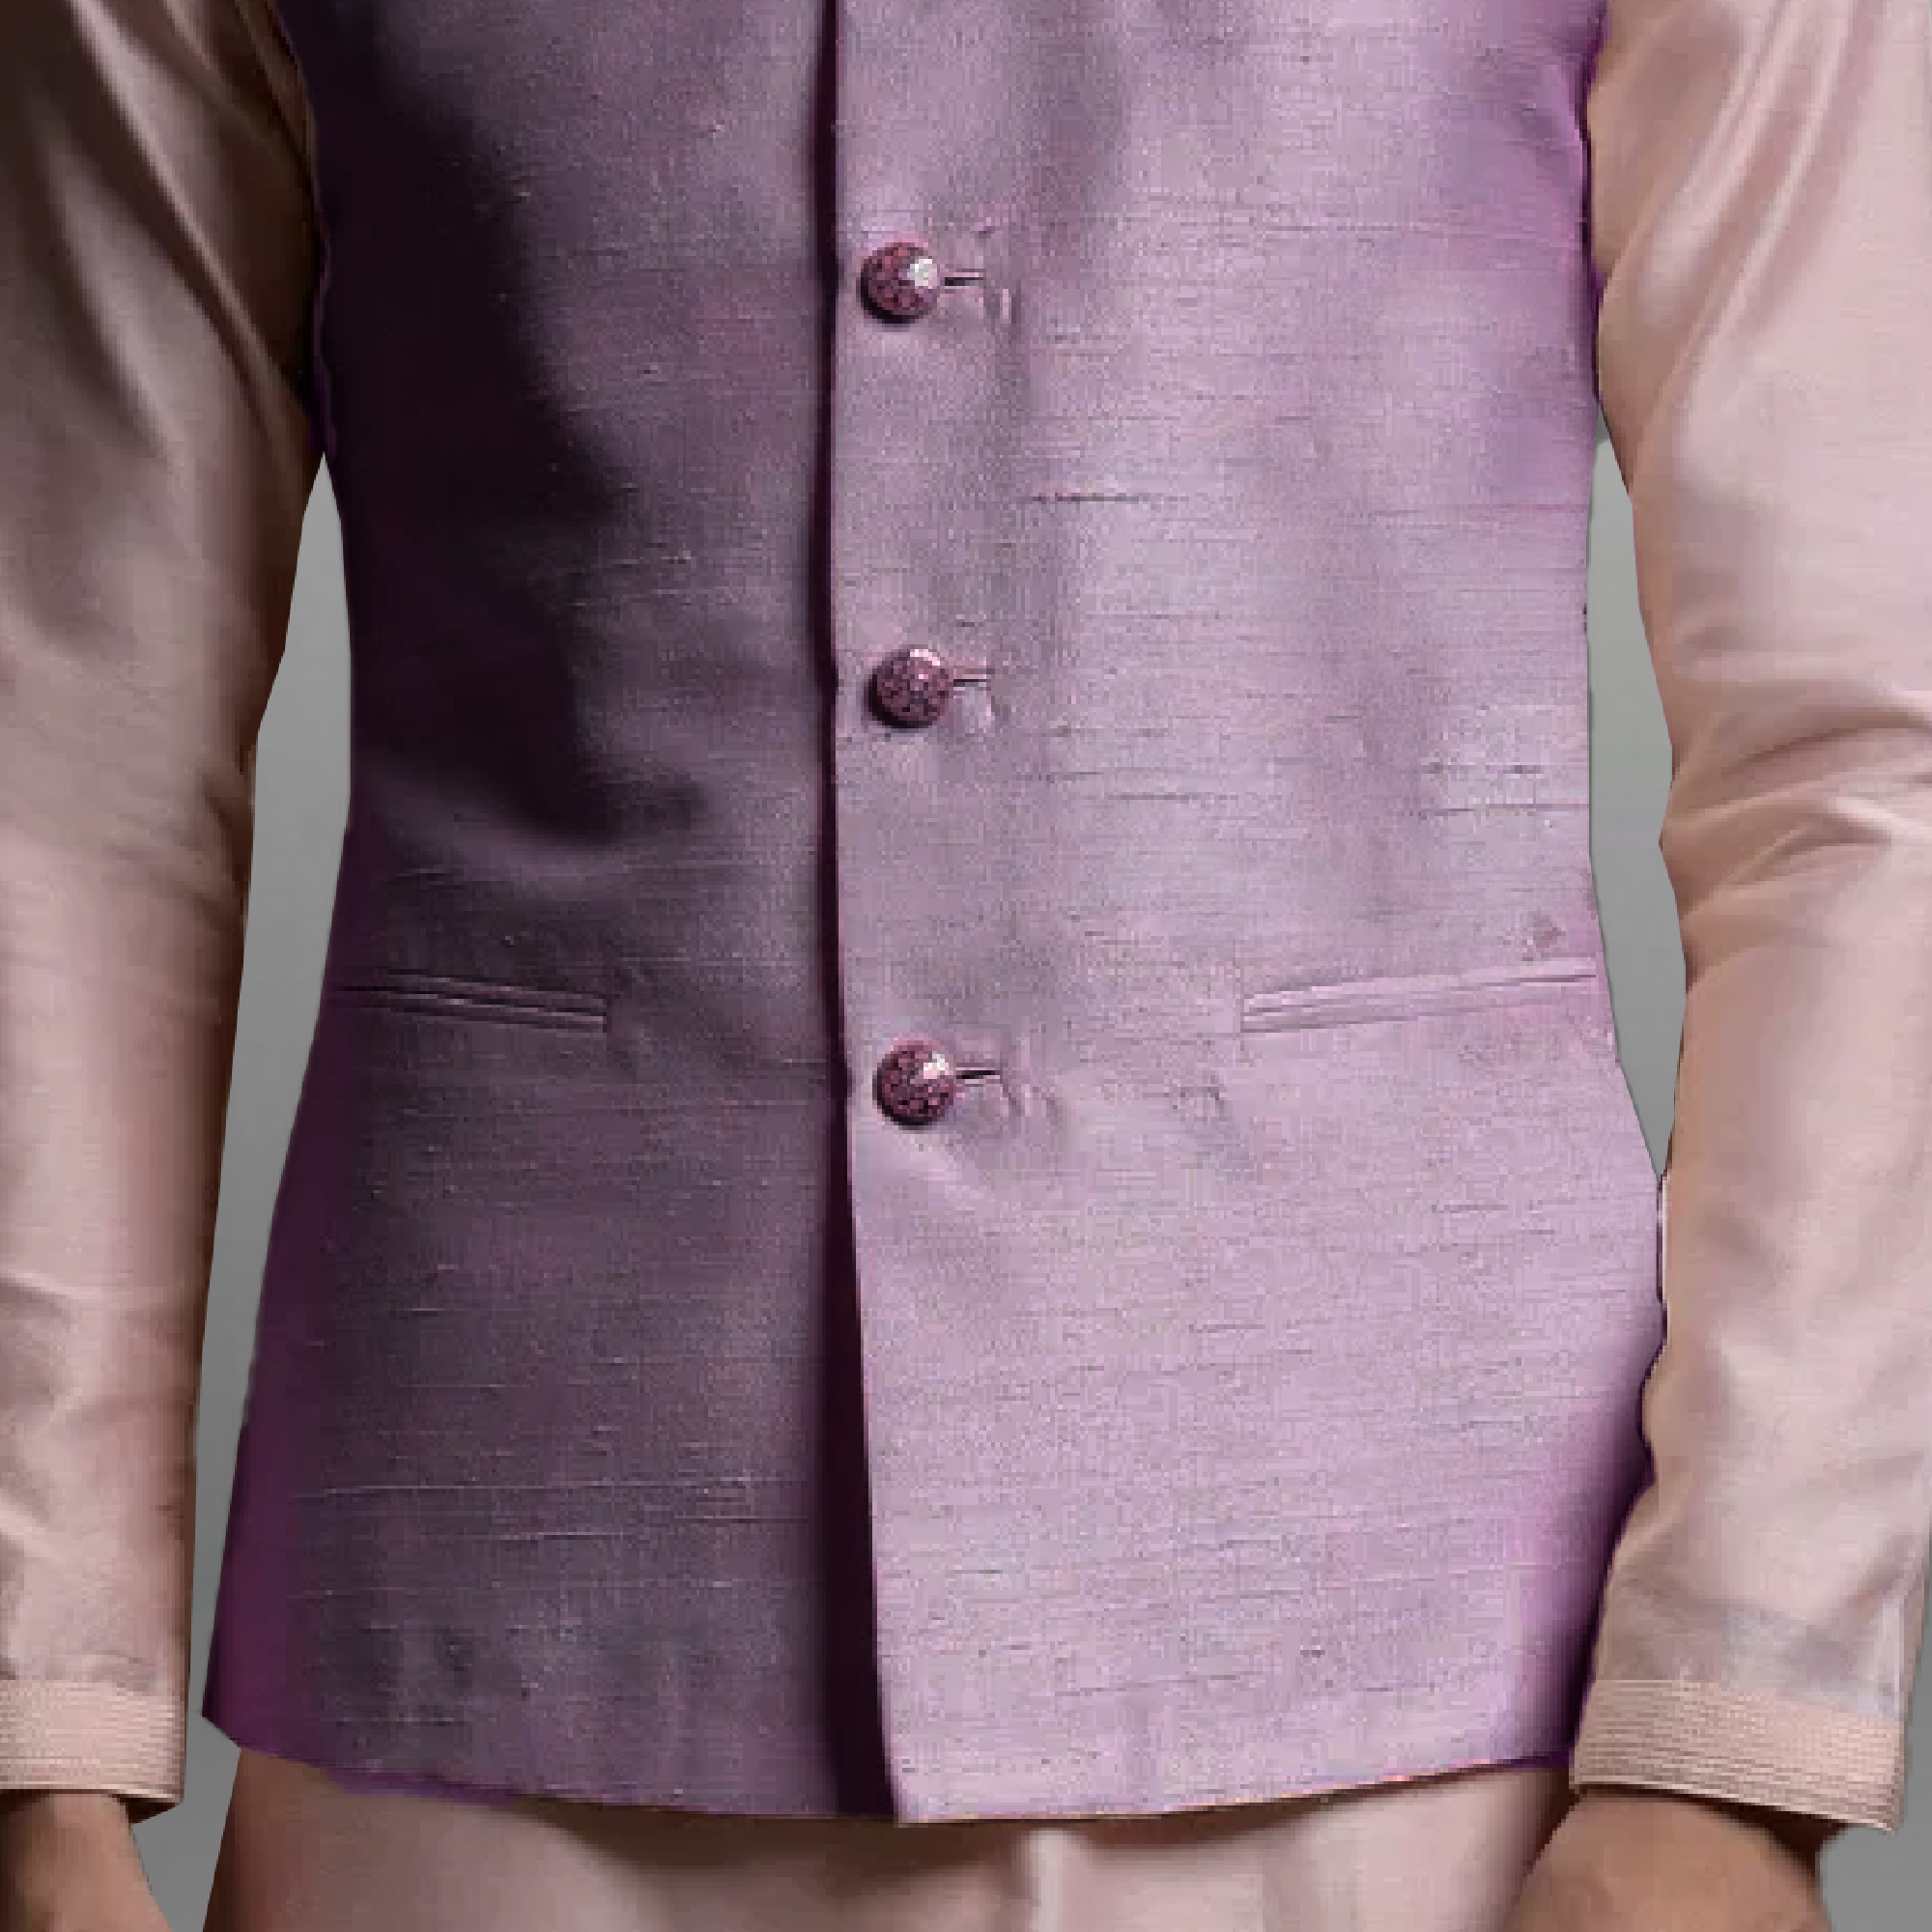 Men's lavender Waistcoat with embroidery work-RMWC008